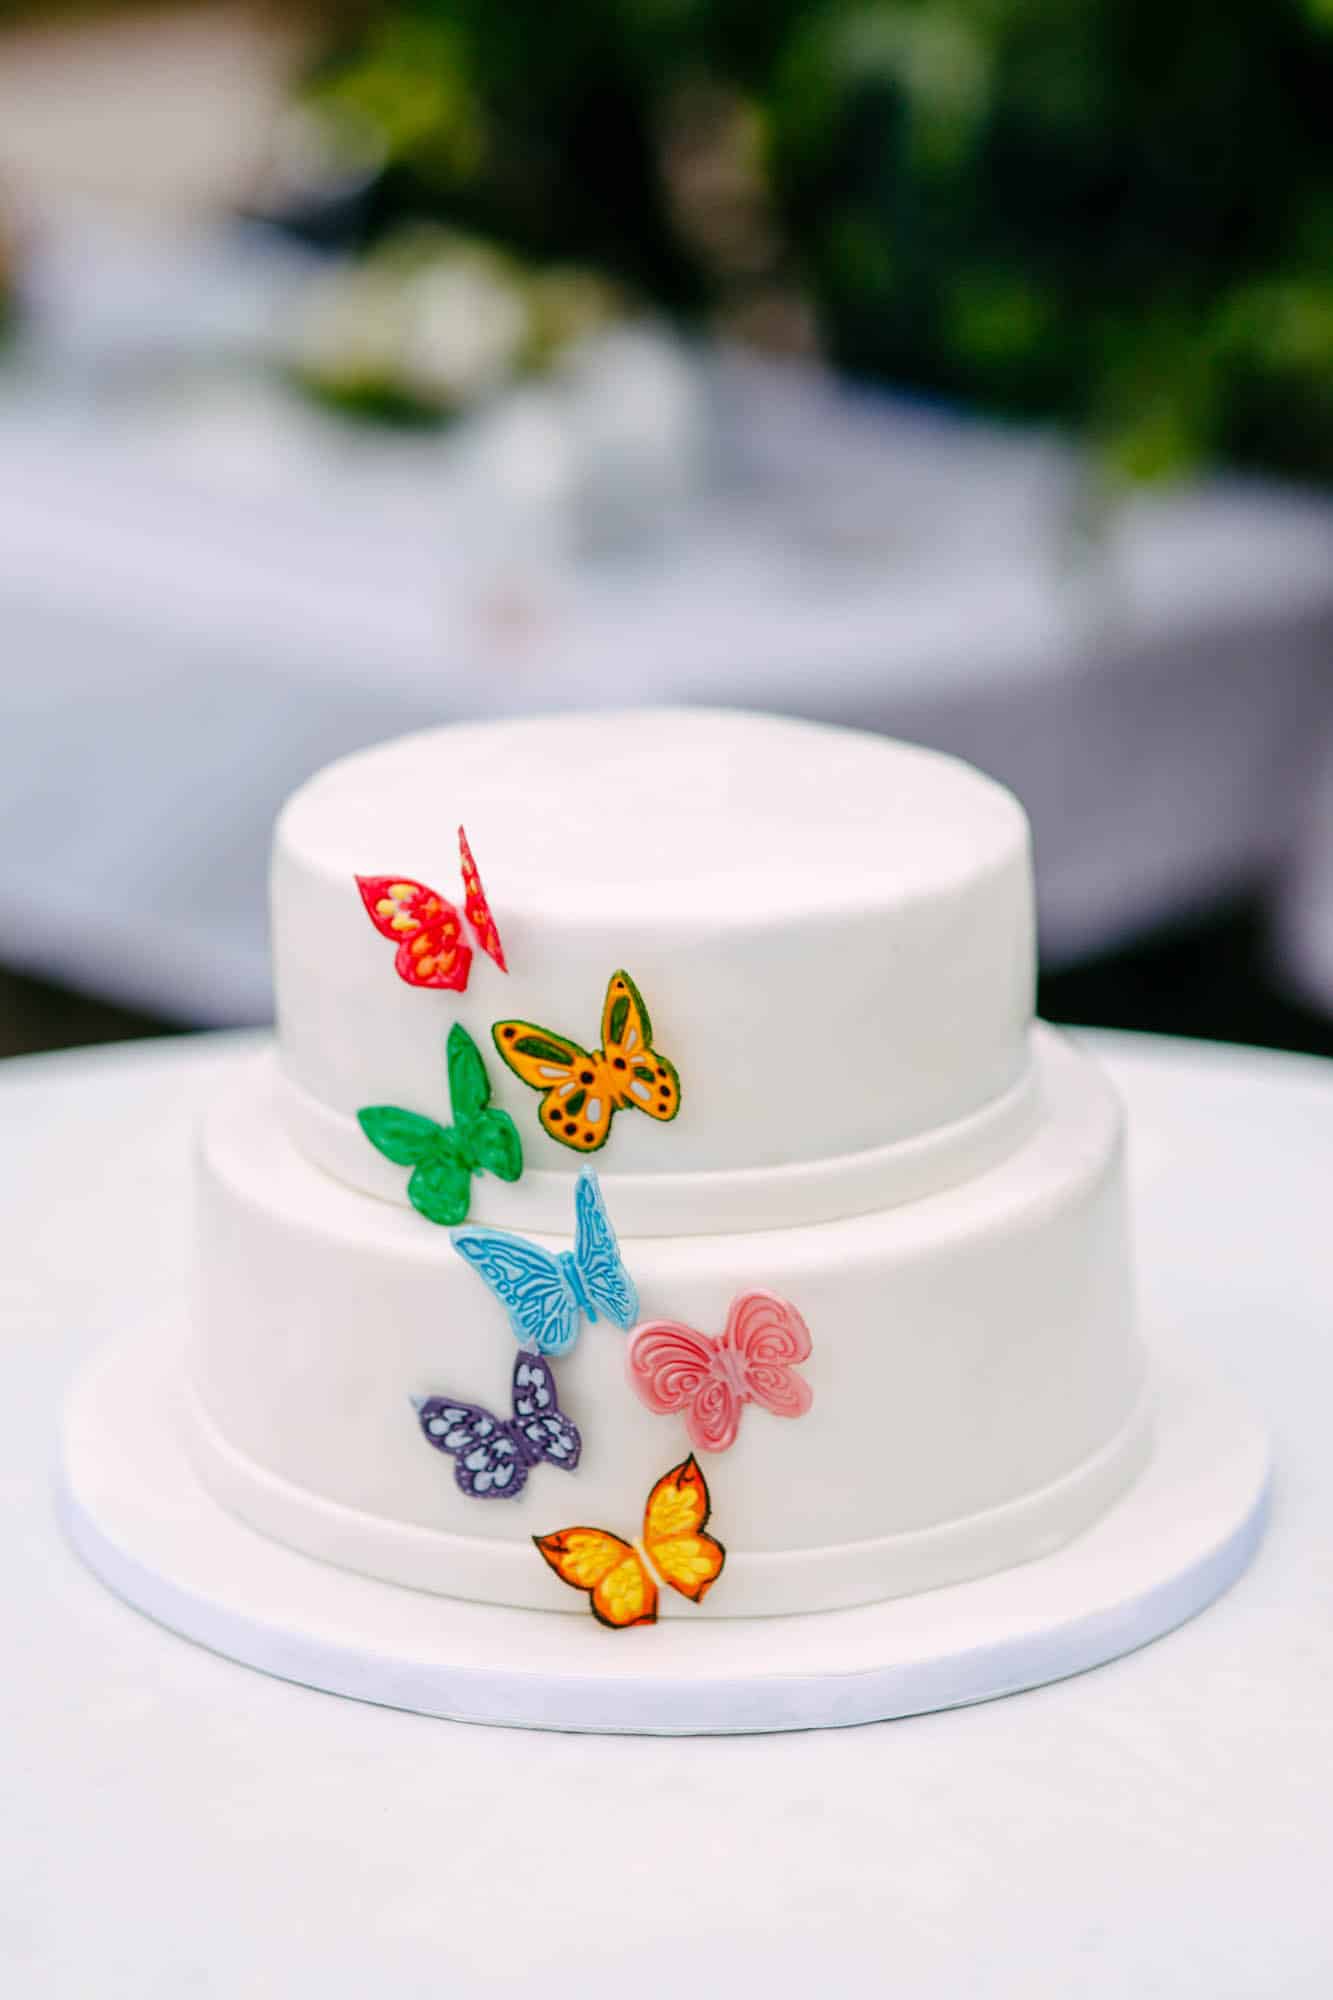 A white cake decorated with colourful butterflies.